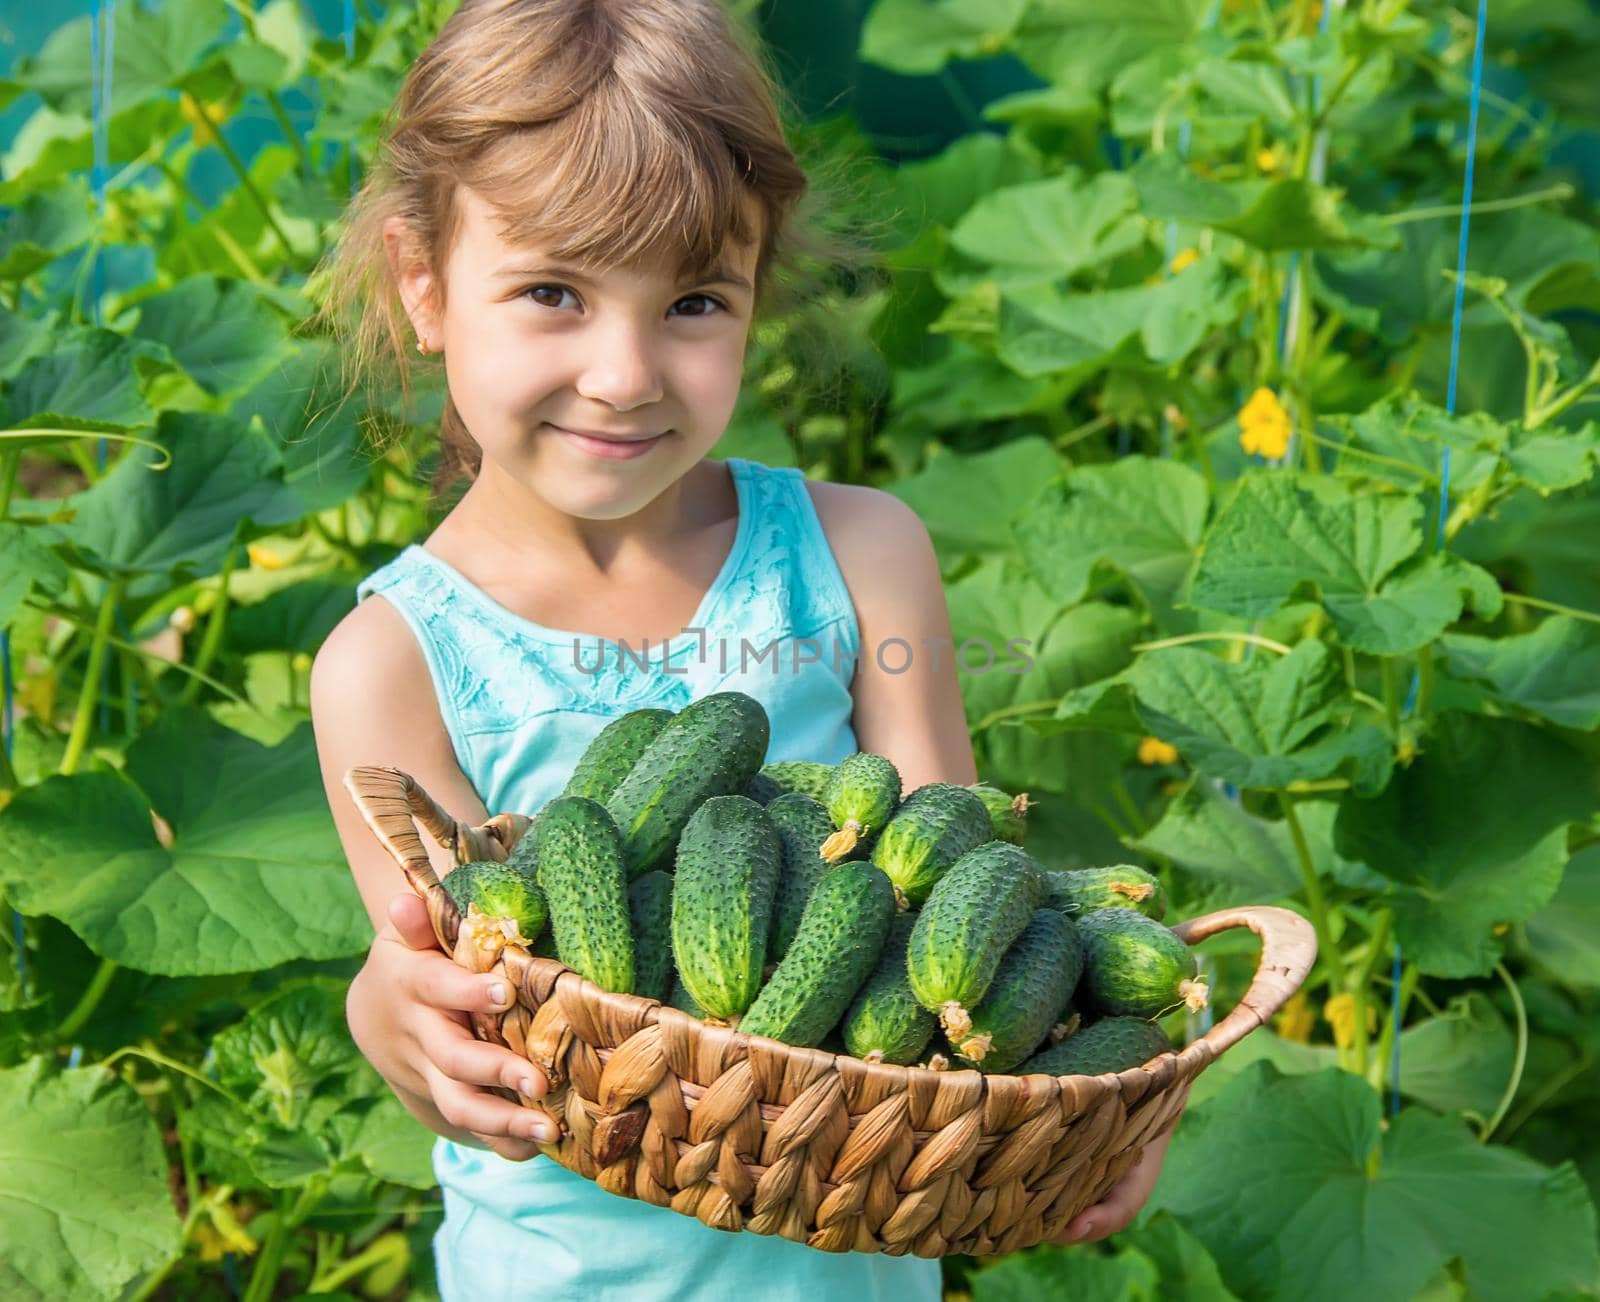 homemade cucumber cultivation and harvest in the hands by yanadjana